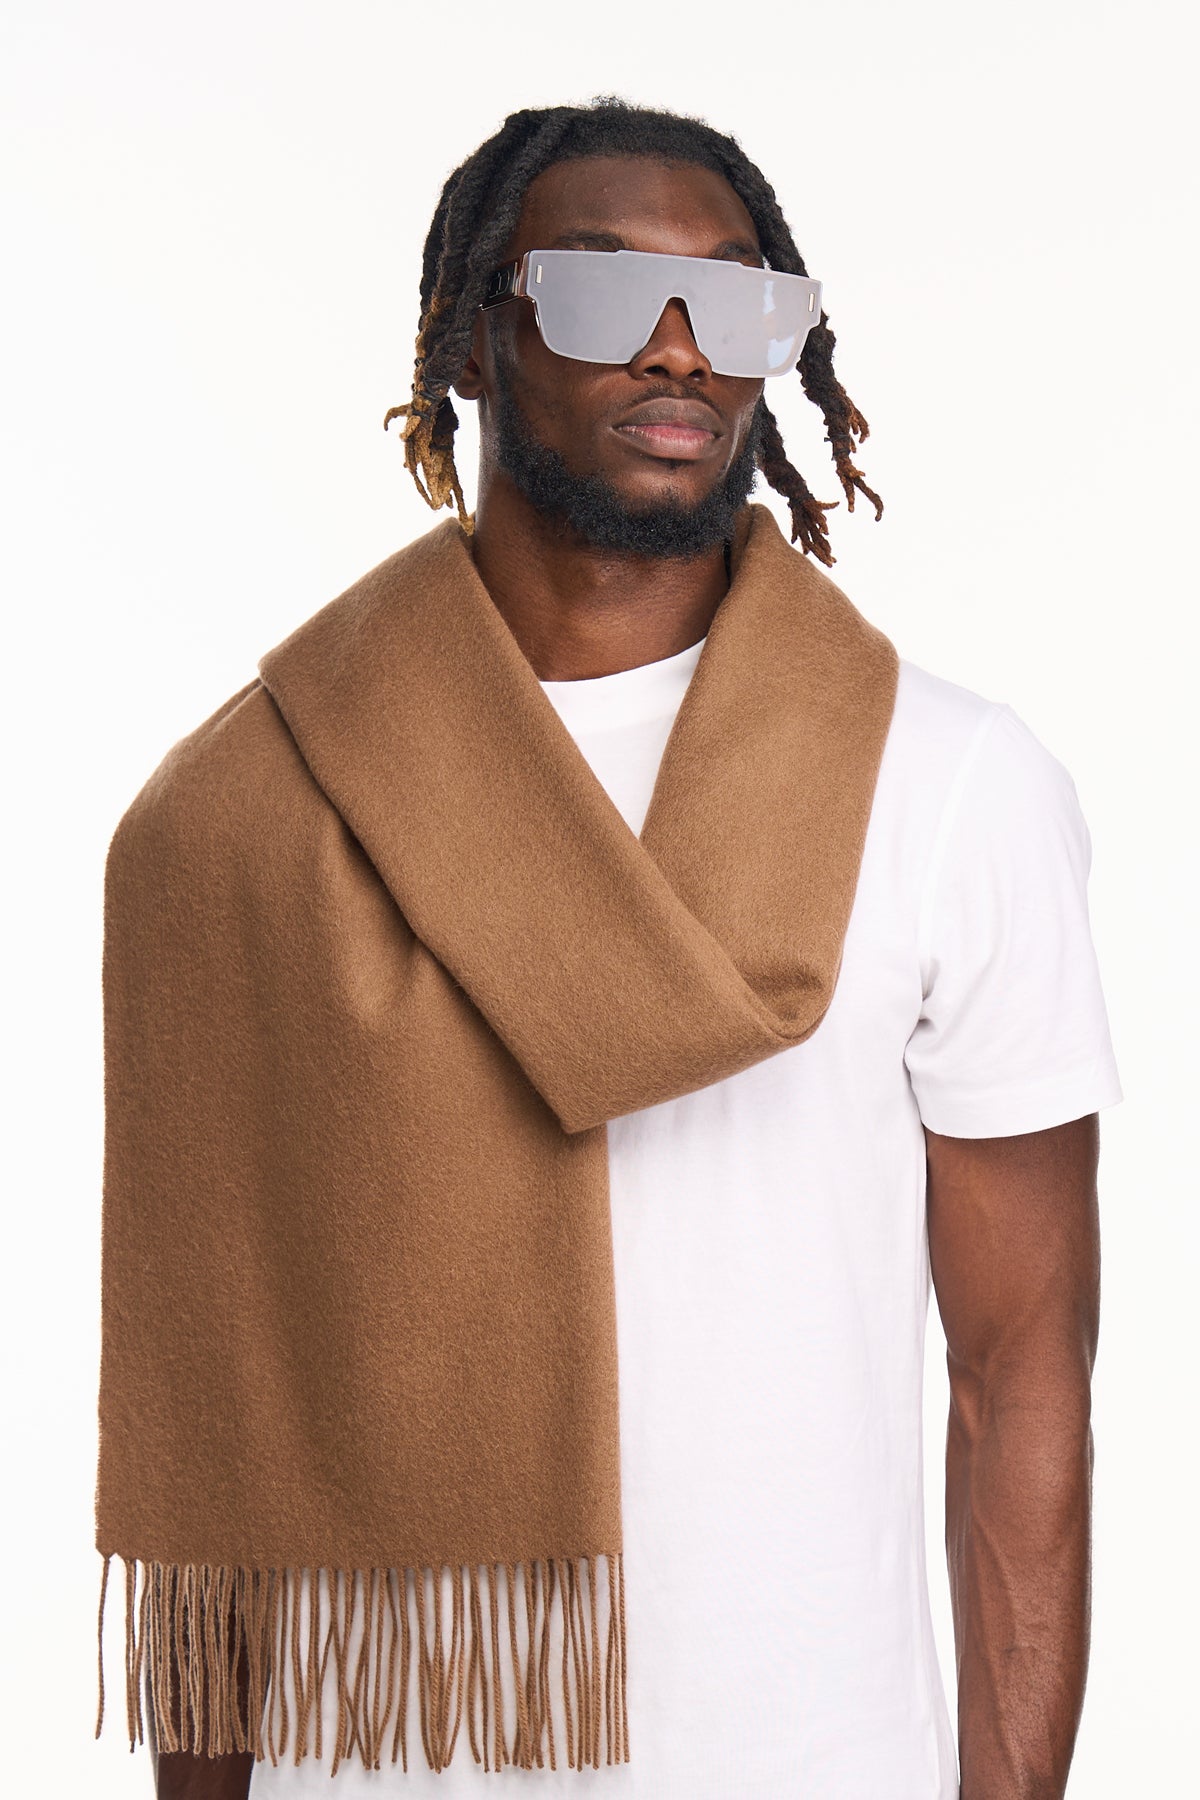 Plain Scarf Brown Oversized Wrap 100% Pure Lambswool